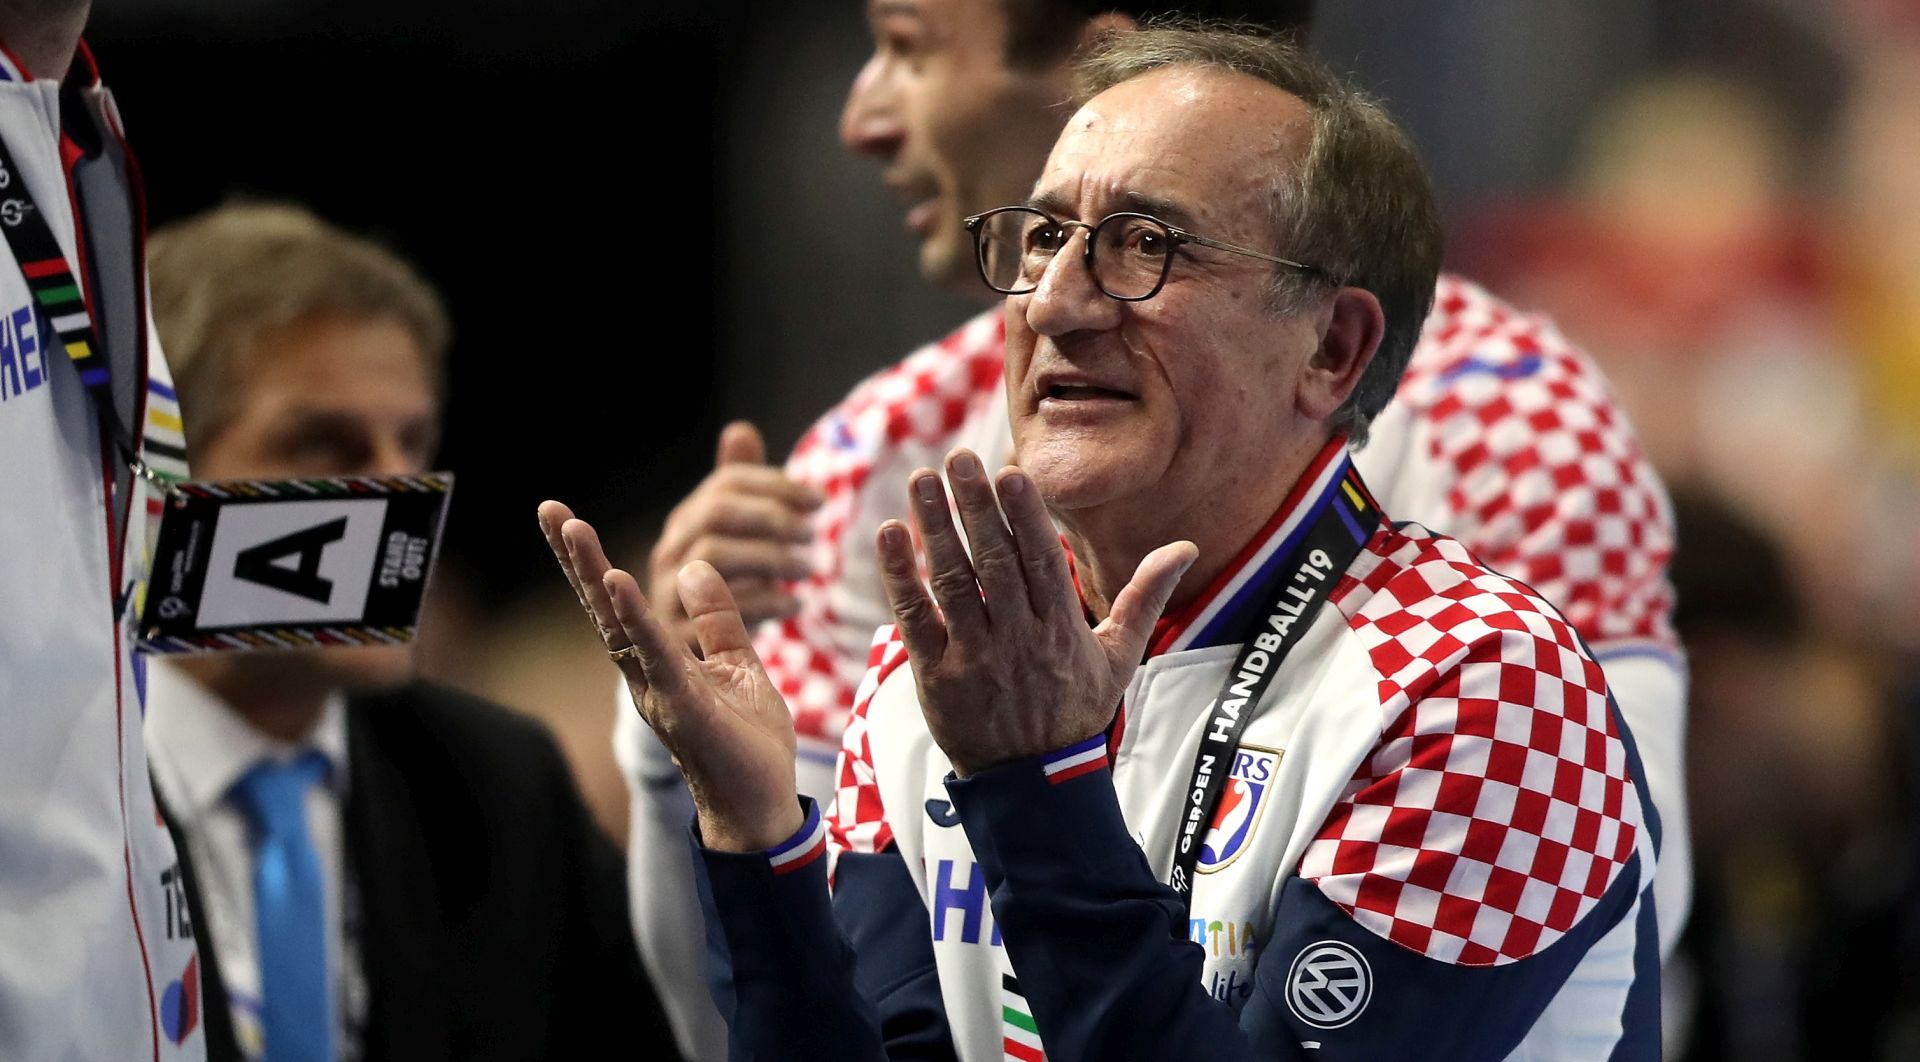 epa07307478 Head coach Lino Cervar of Croatia reacts after the main round group one match between Croatia and Germany at the IHF Men's Handball World Championship in Cologne, Germany, 21 January 2019.  EPA/FRIEDEMANN VOGEL